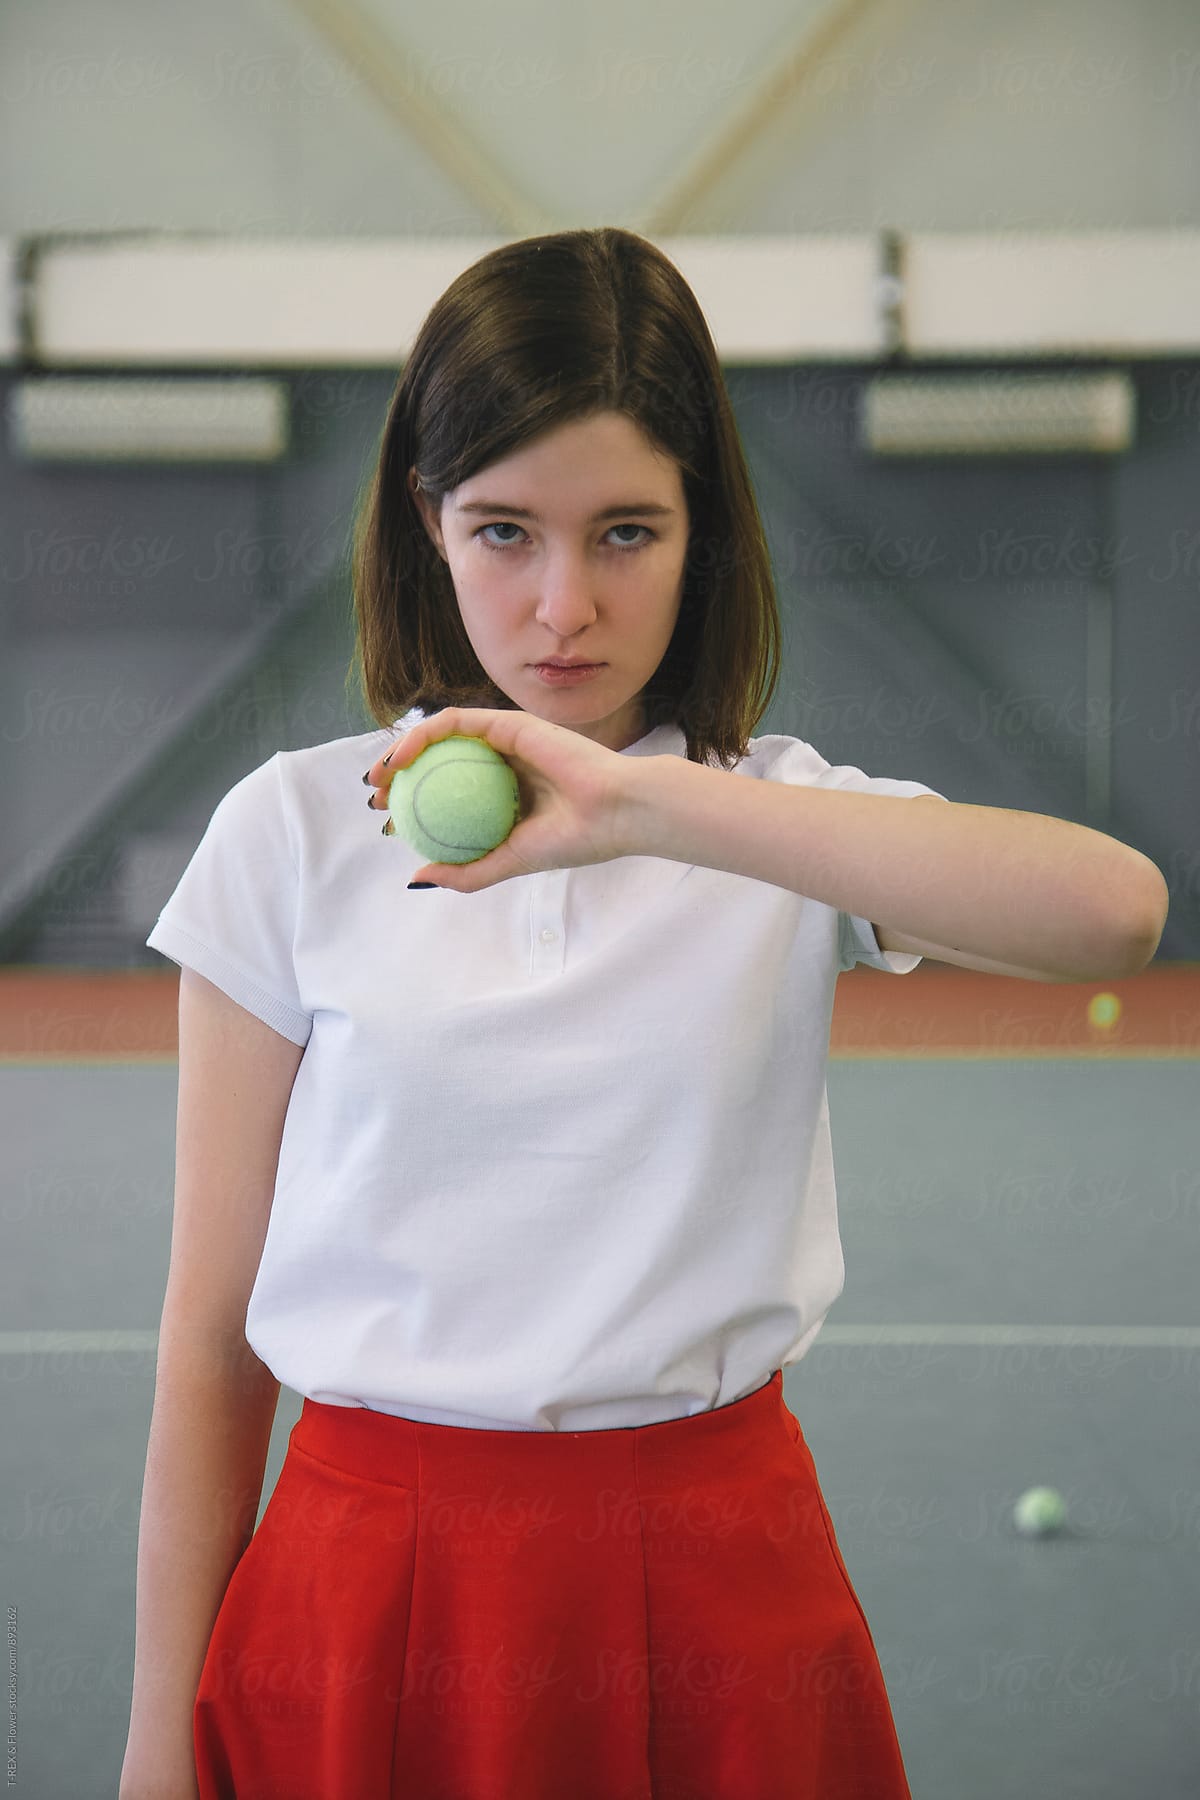 Girl Holding Tennis Ball In Front Of Her While Looking At Camera Del